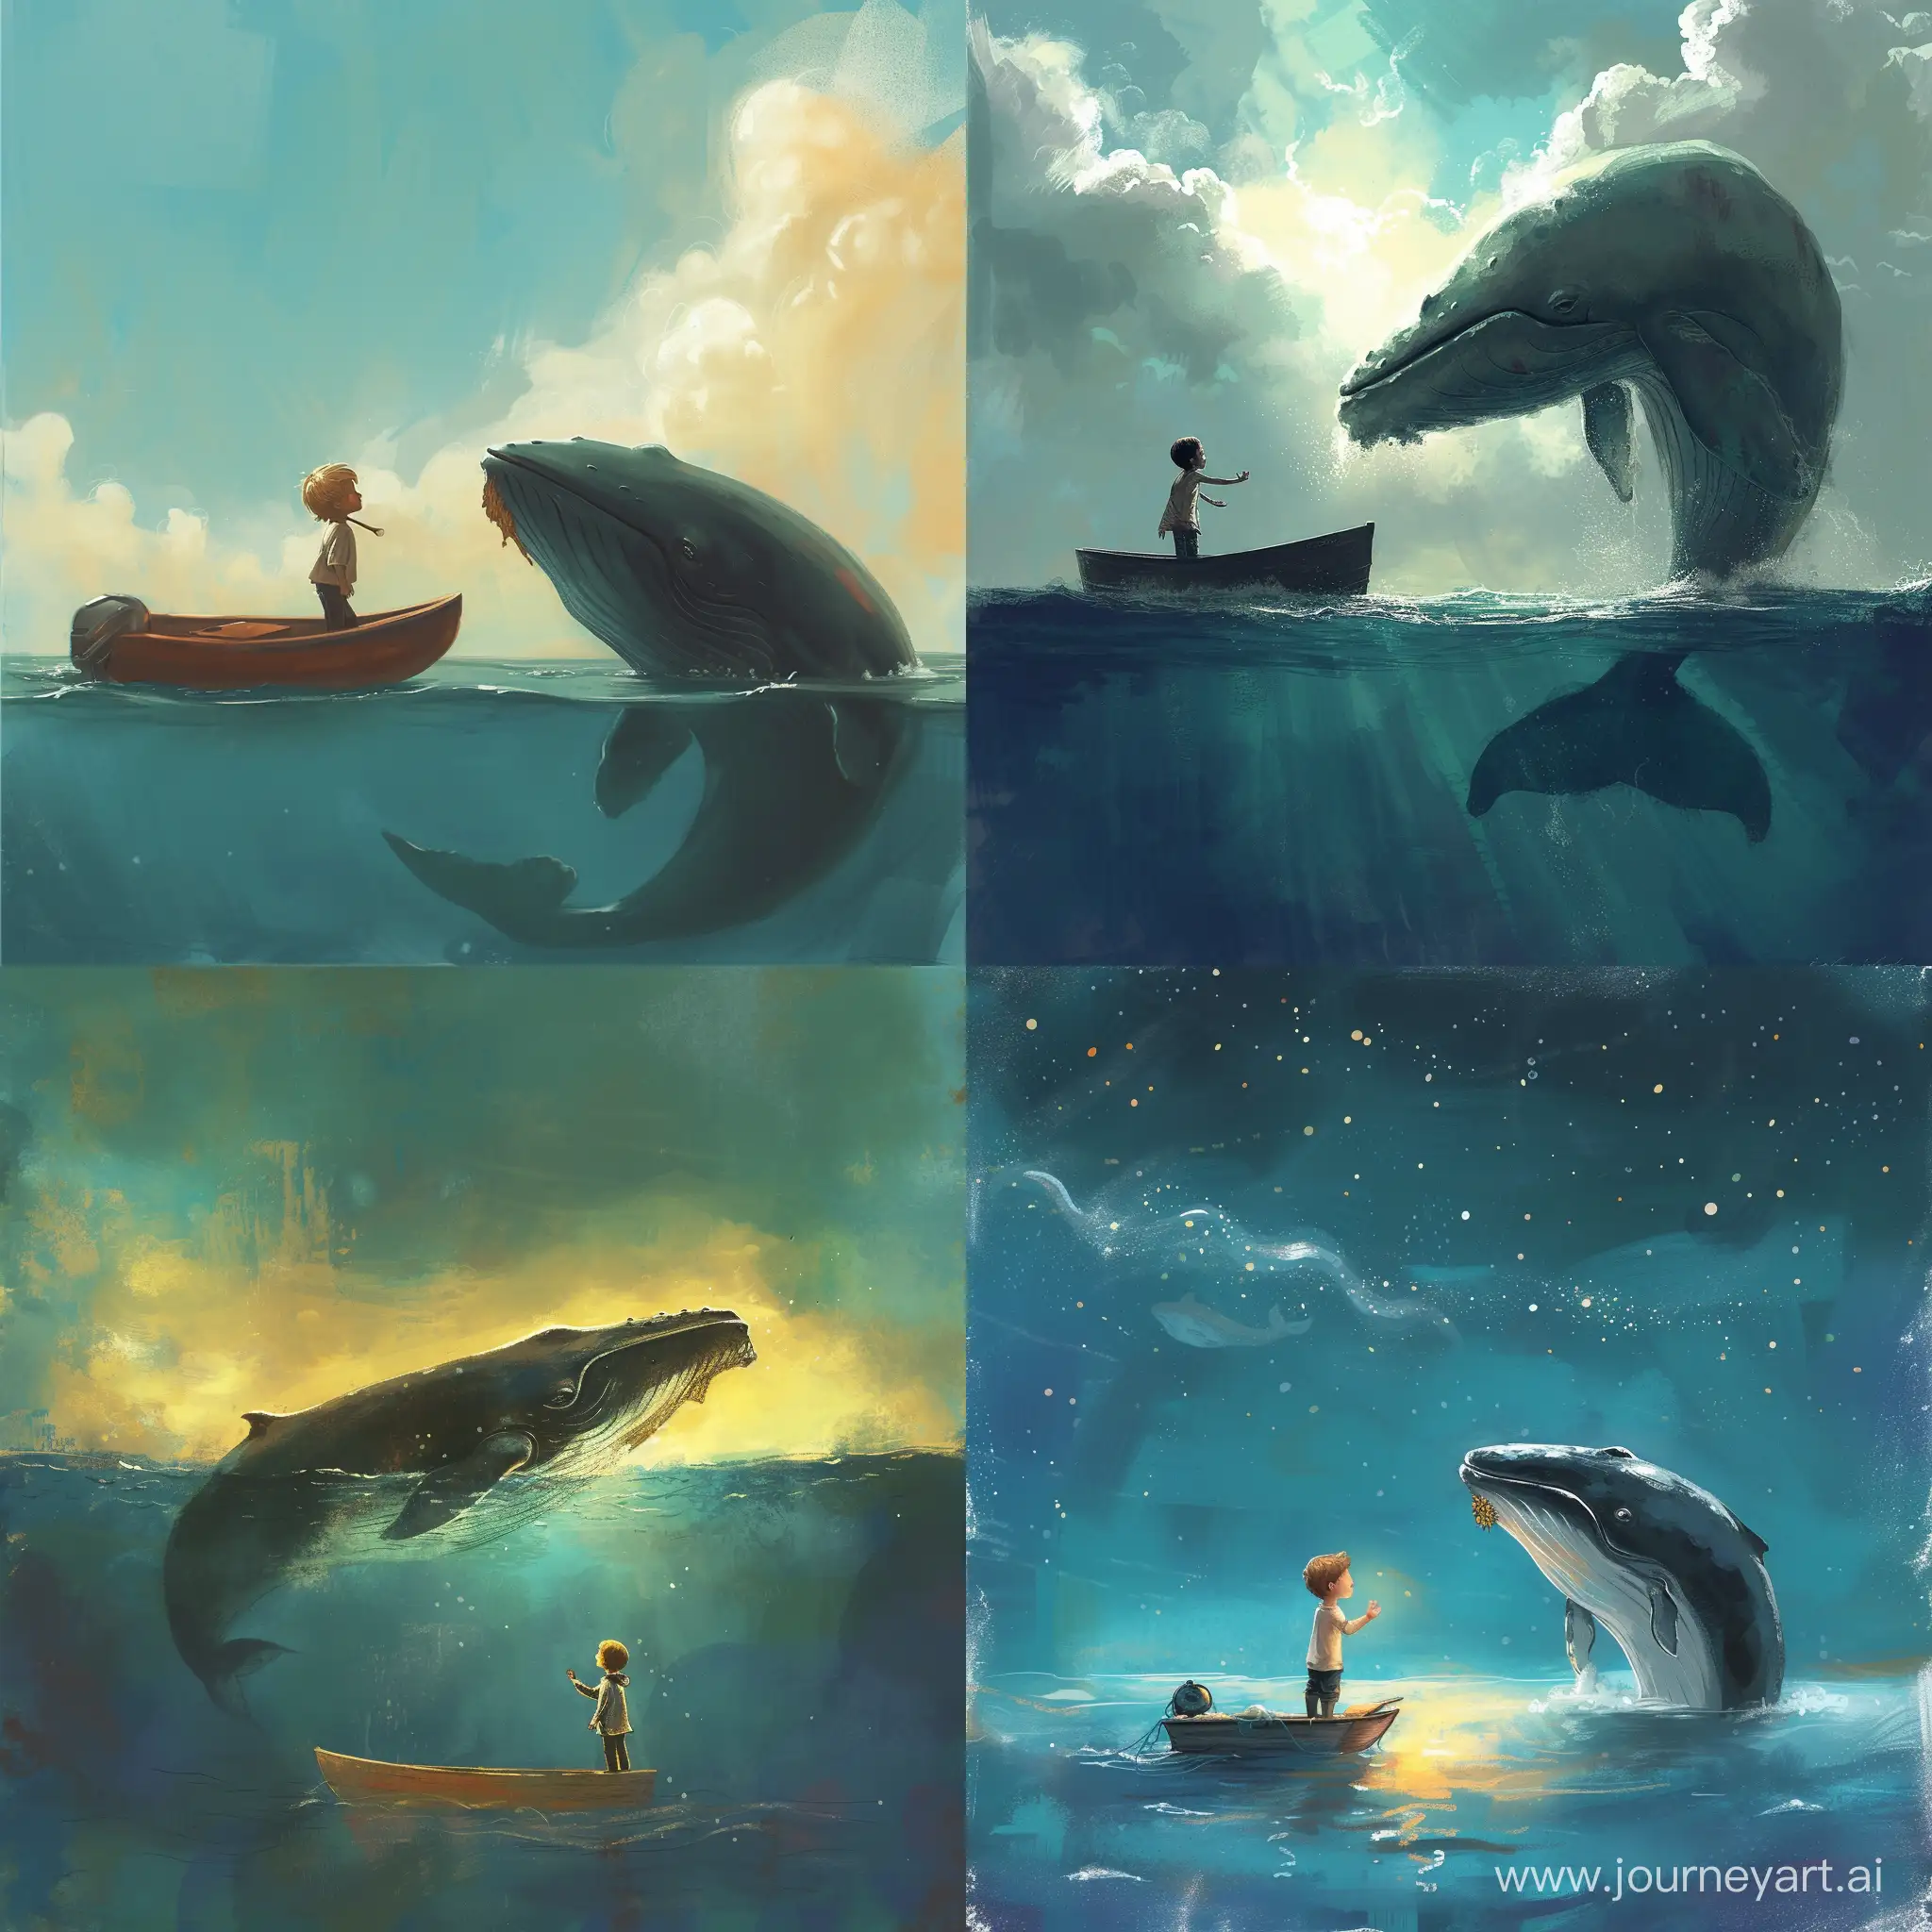 Enchanting-Encounter-Boy-in-a-Boat-Conversing-with-a-Whale